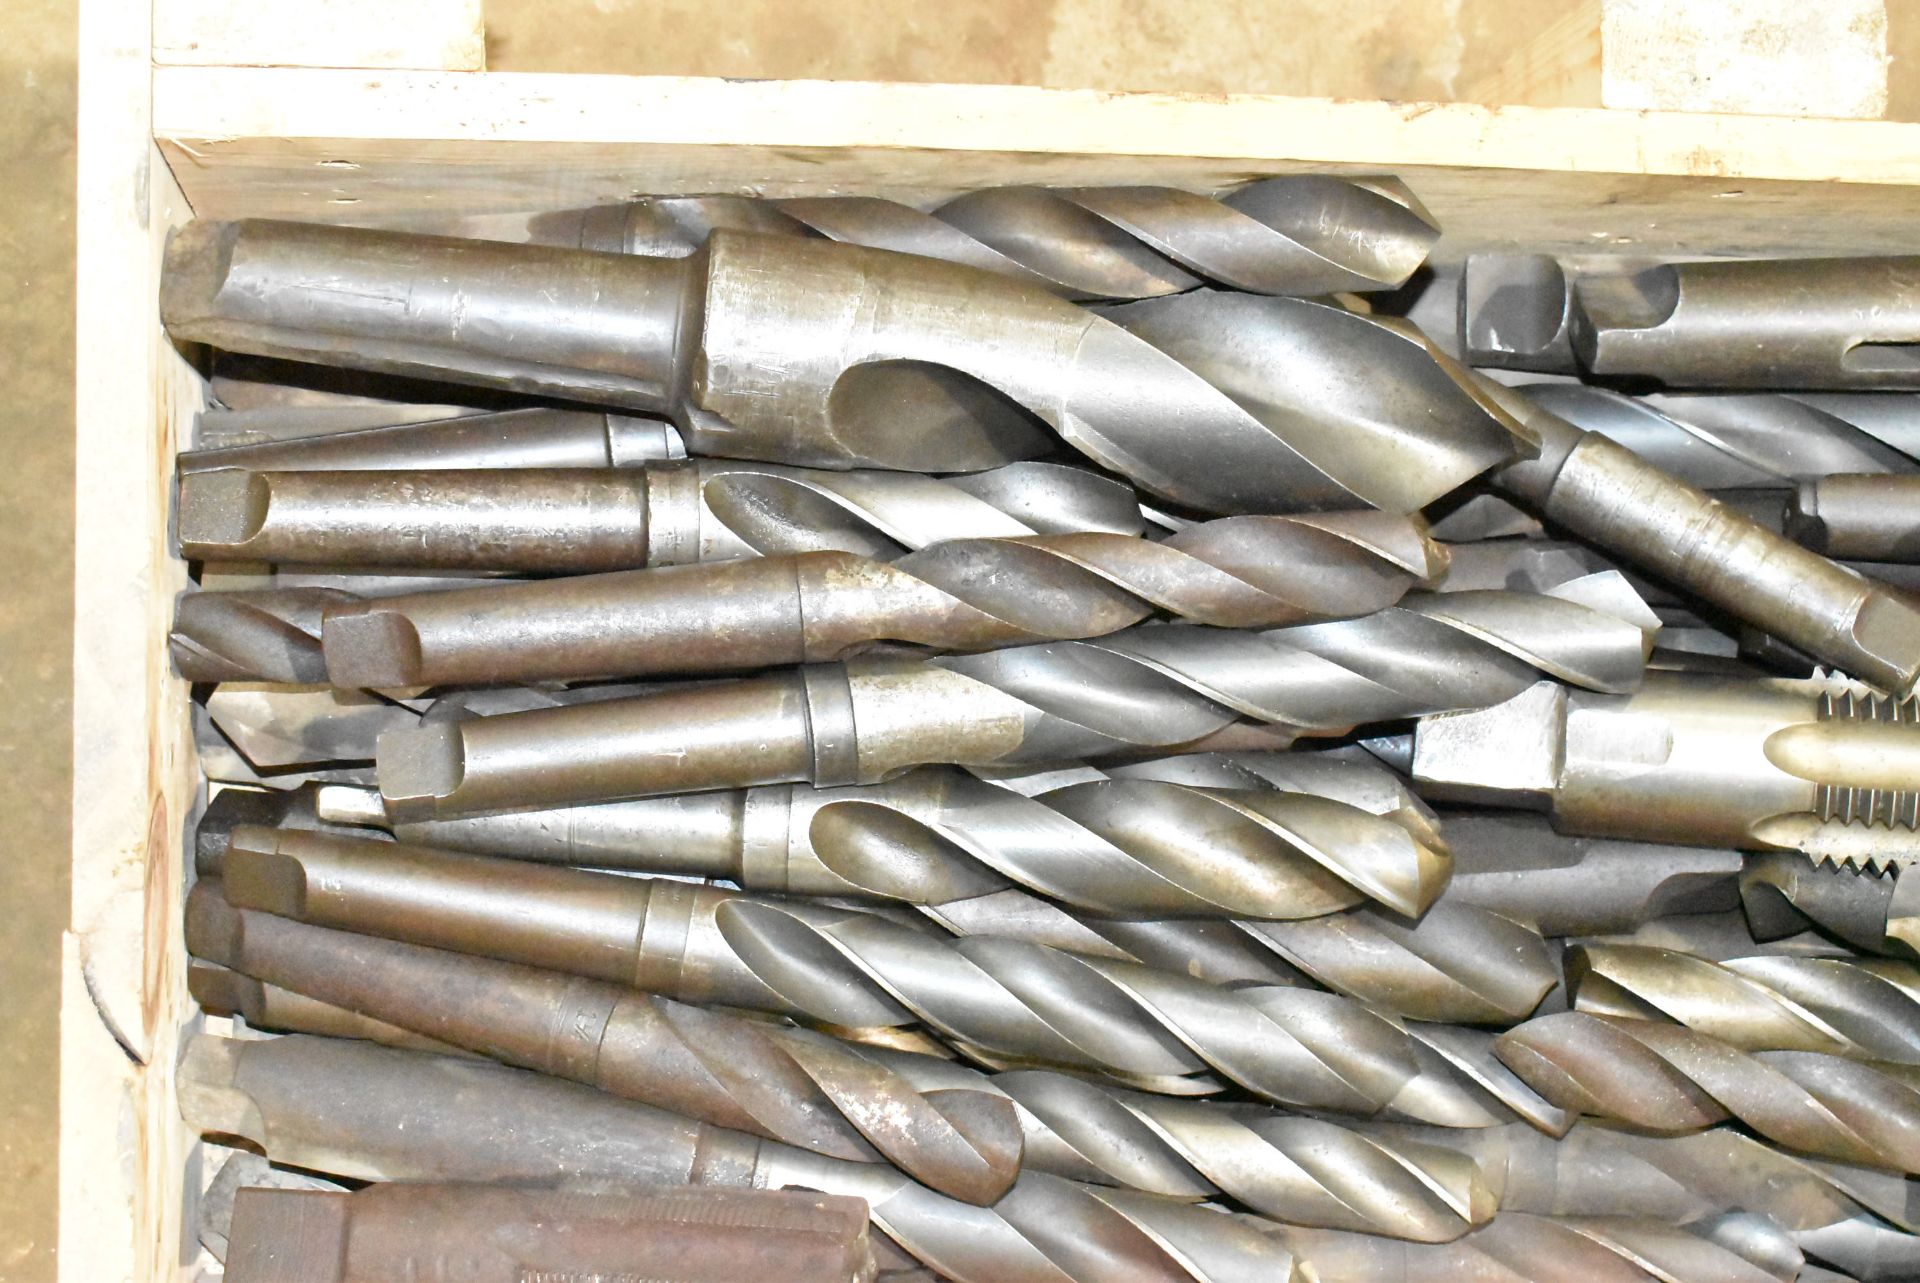 LOT/ HEAVY DUTY TAPER SHANK DRILLS [RIGGING FEES FOR LOT #1117 - $30 USD PLUS APPLICABLE TAXES] - Image 2 of 3